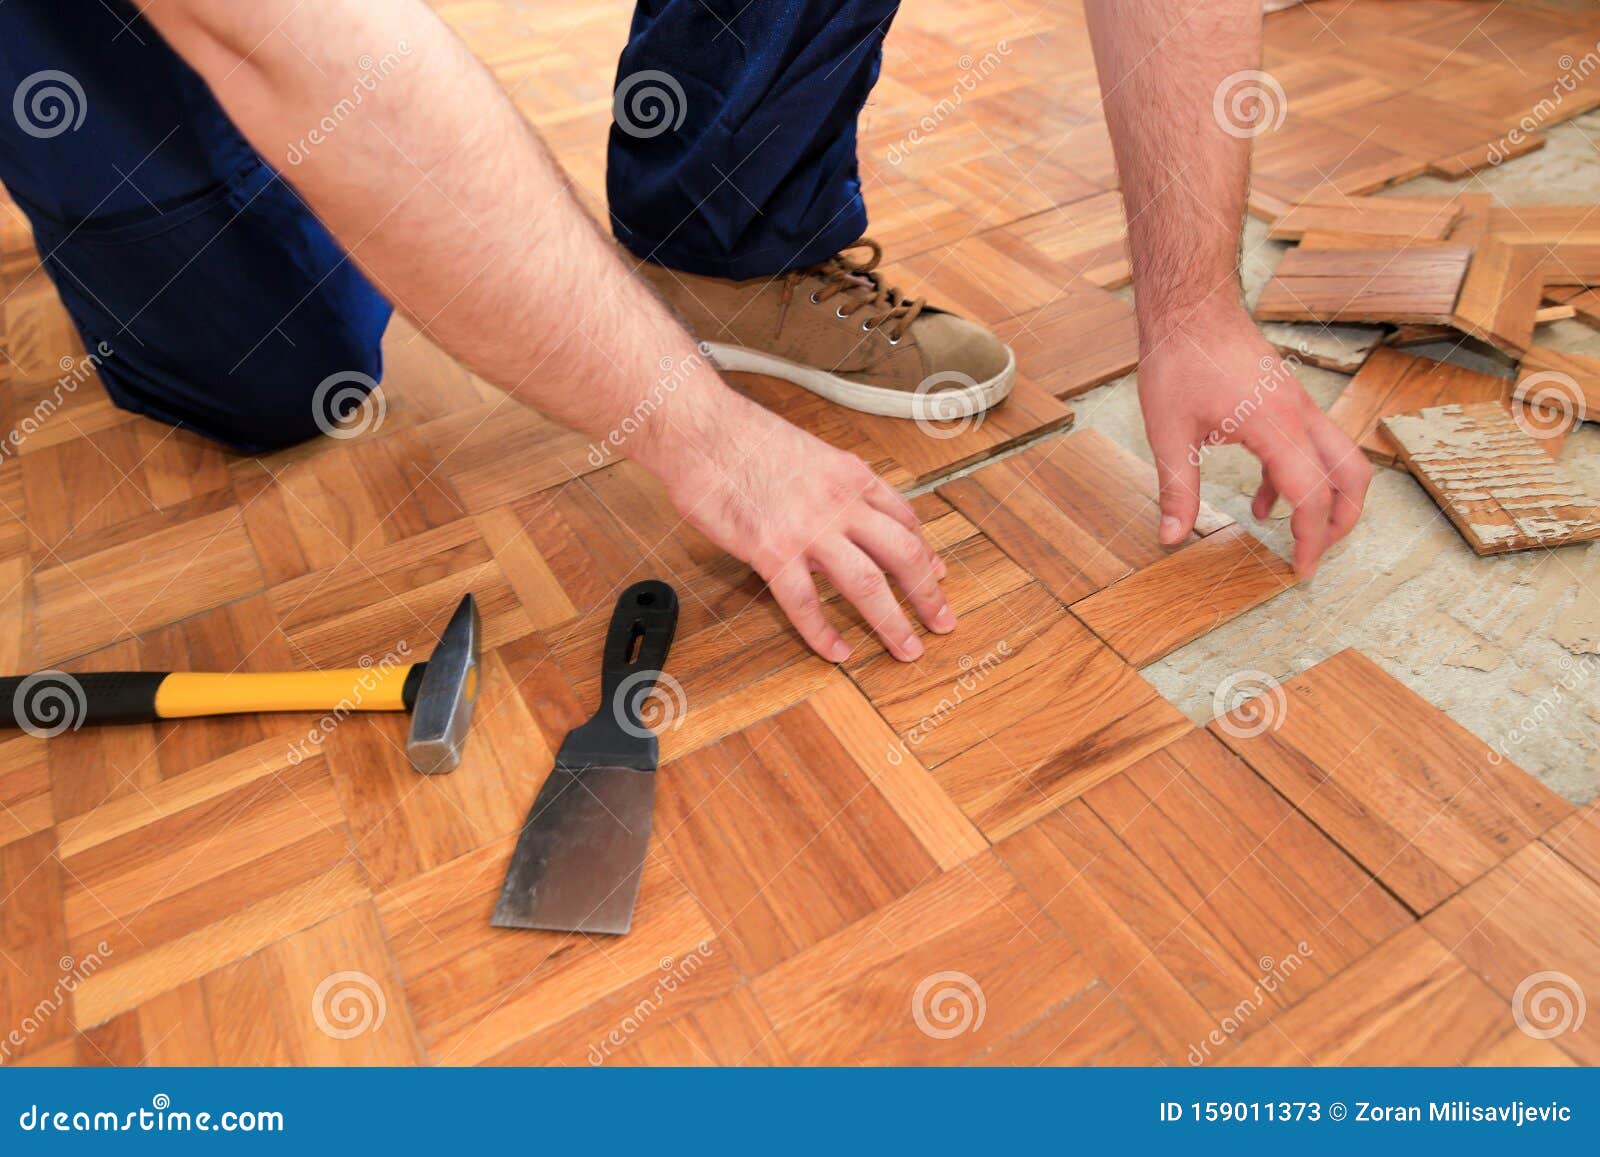 Construction Worker And Handyman Is Removing Old Wooden Parquet